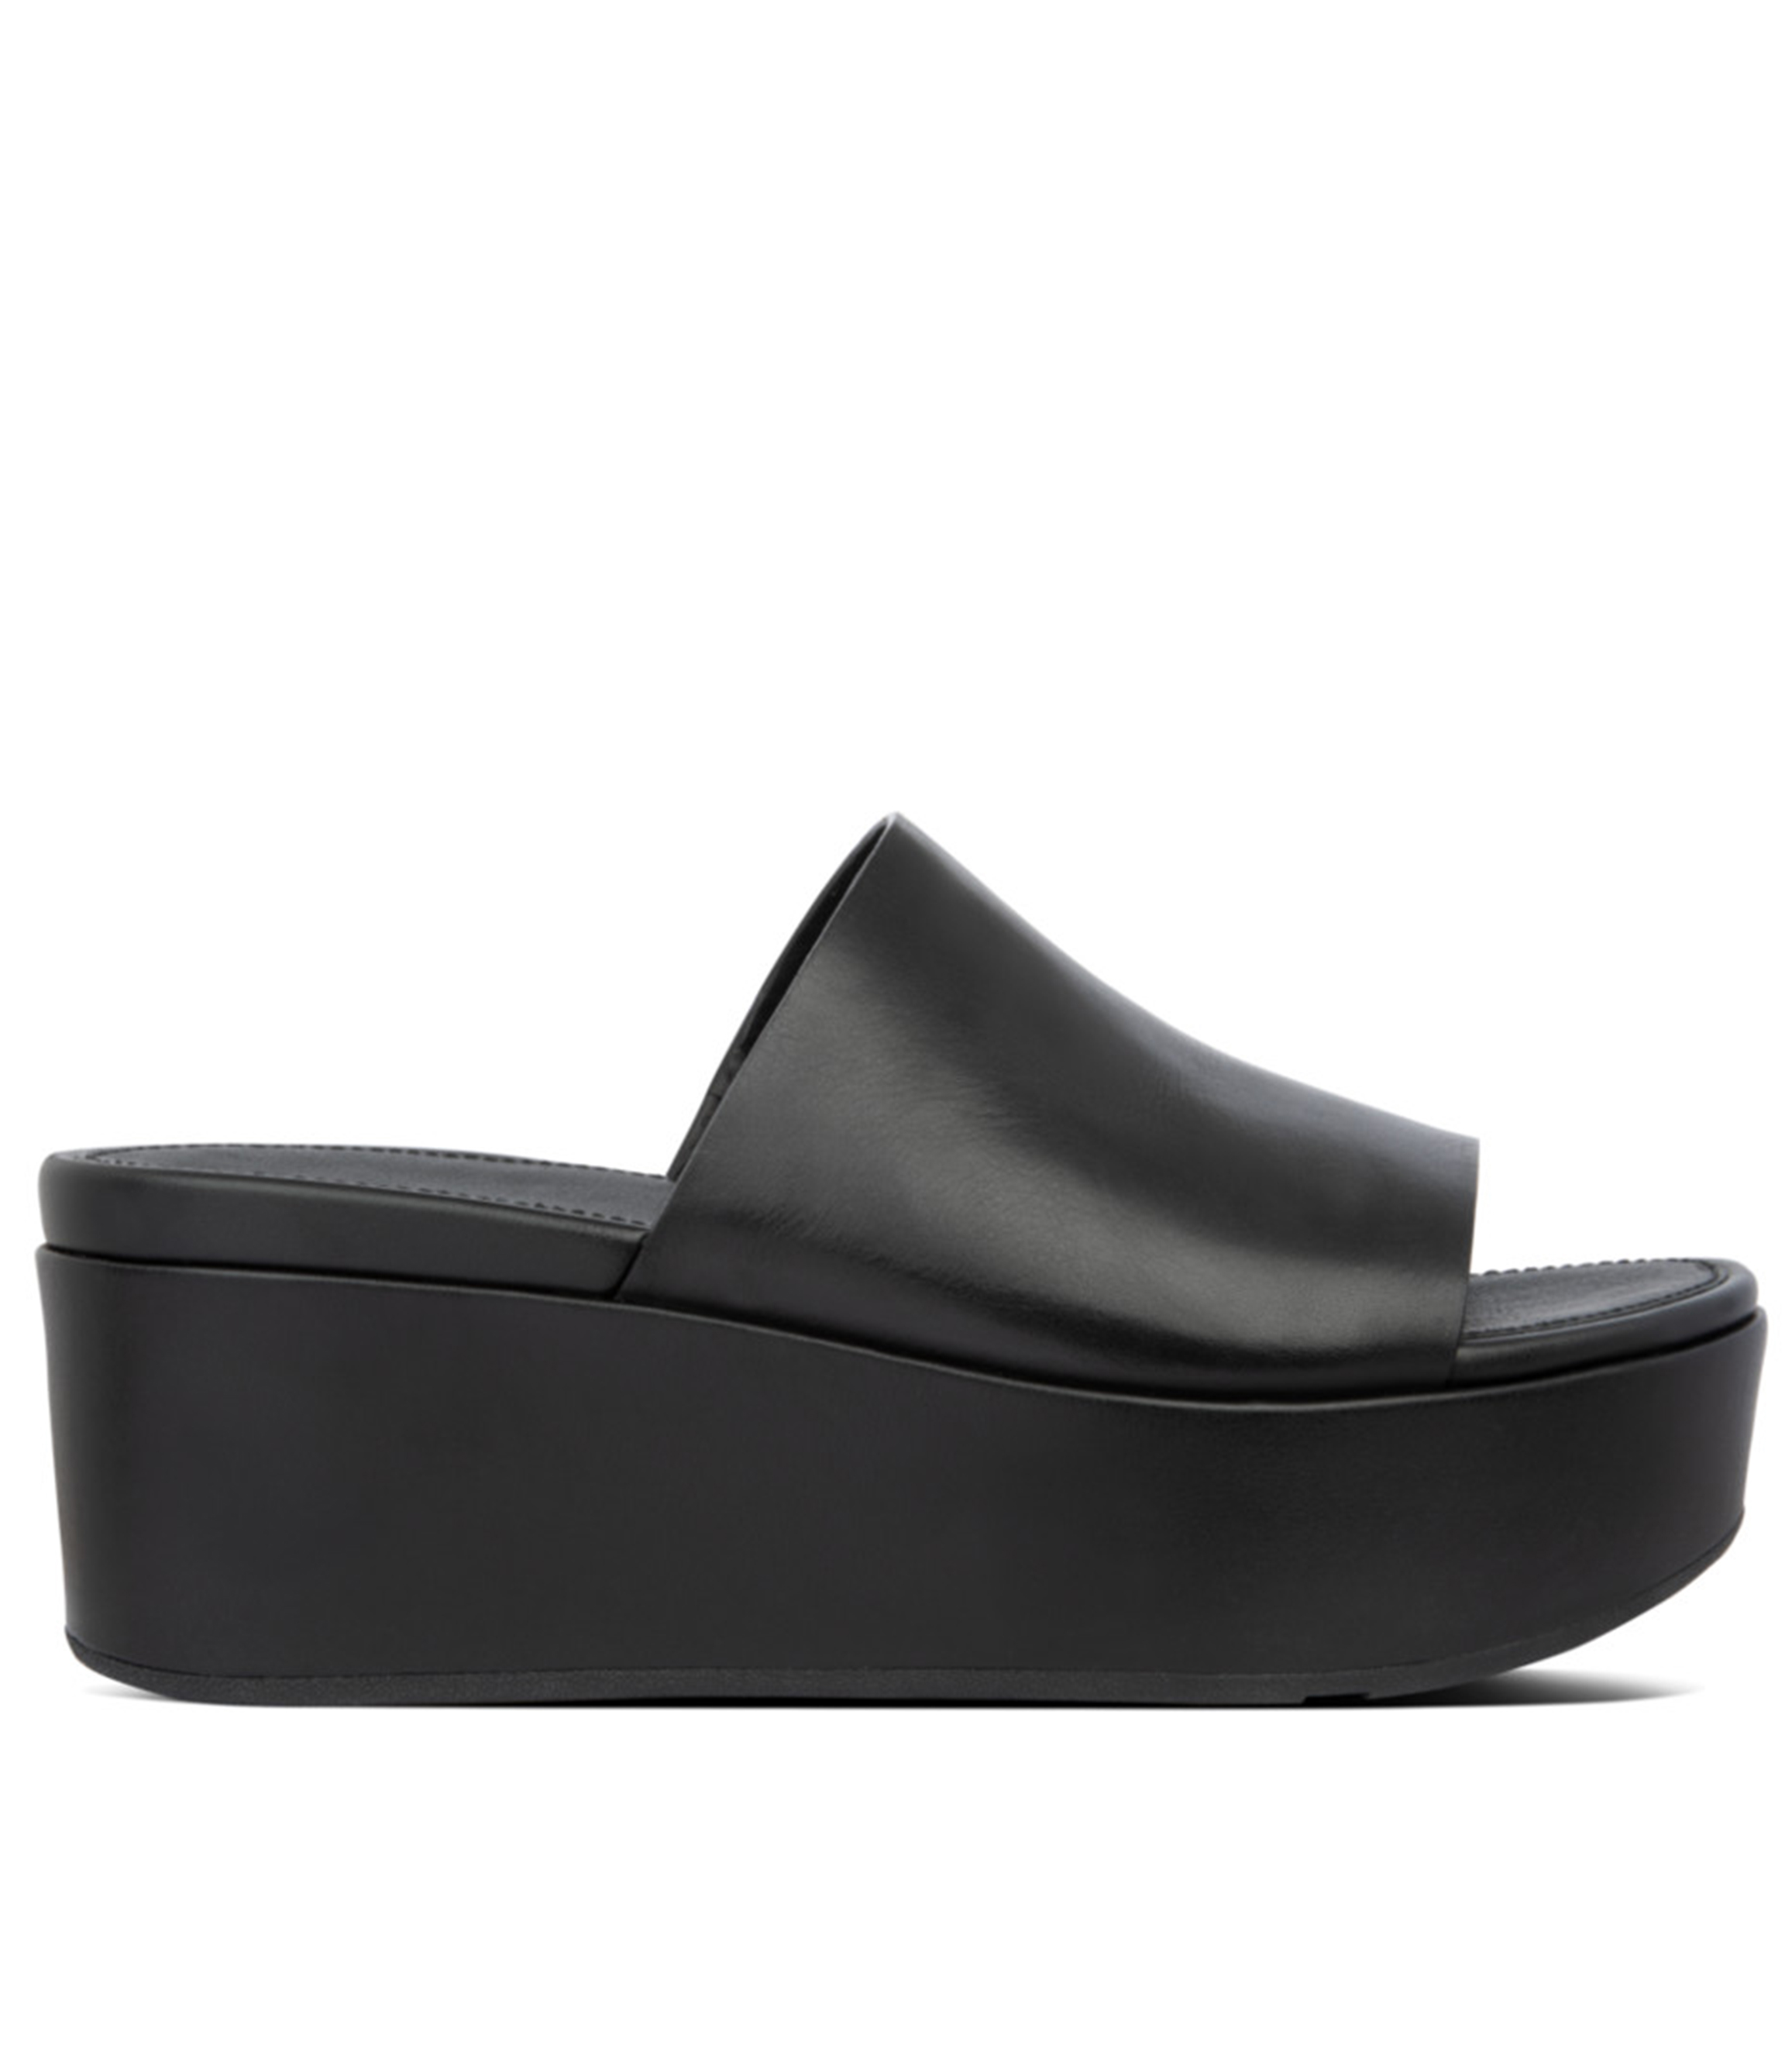 FIT FLOP BLACK LEATHER ELOISE WEDGE SLIDE | Rosella - Style inspired by ...